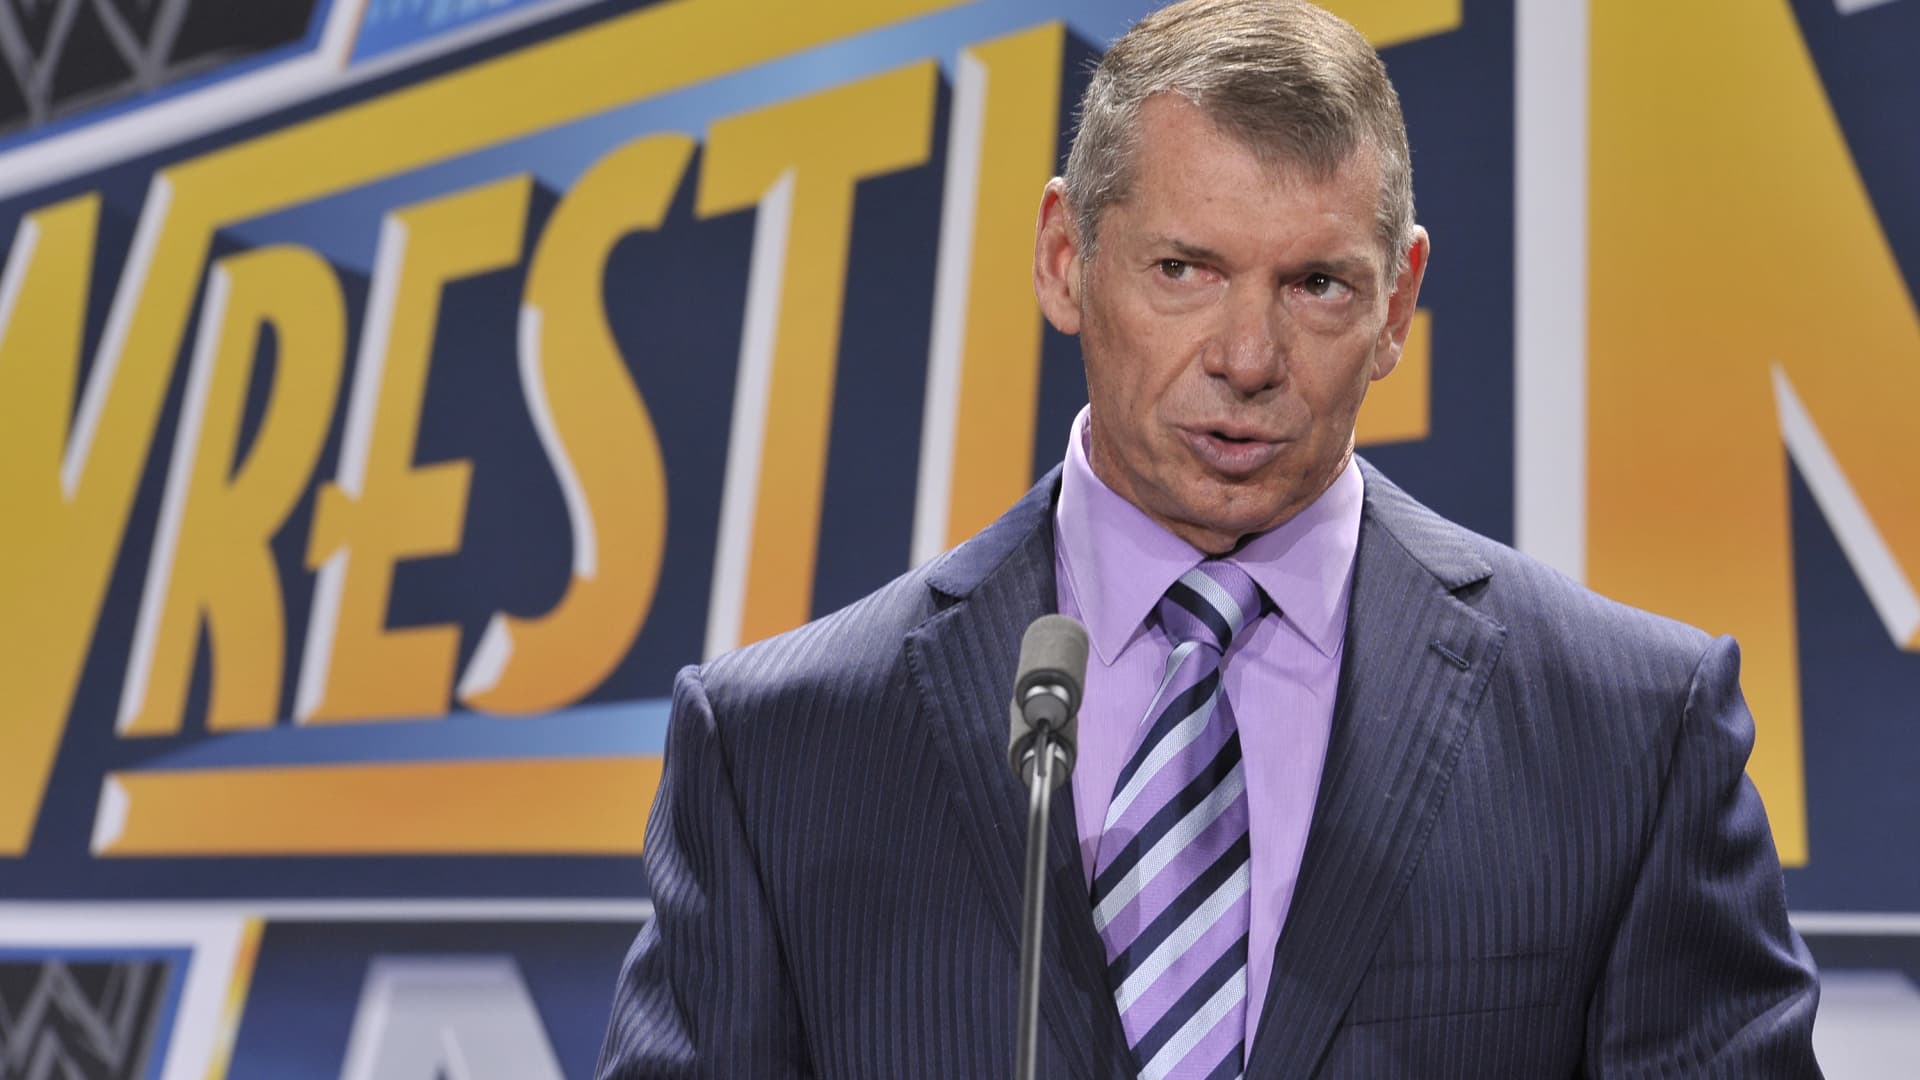 WWE shares jump as Vince McMahon stages comeback